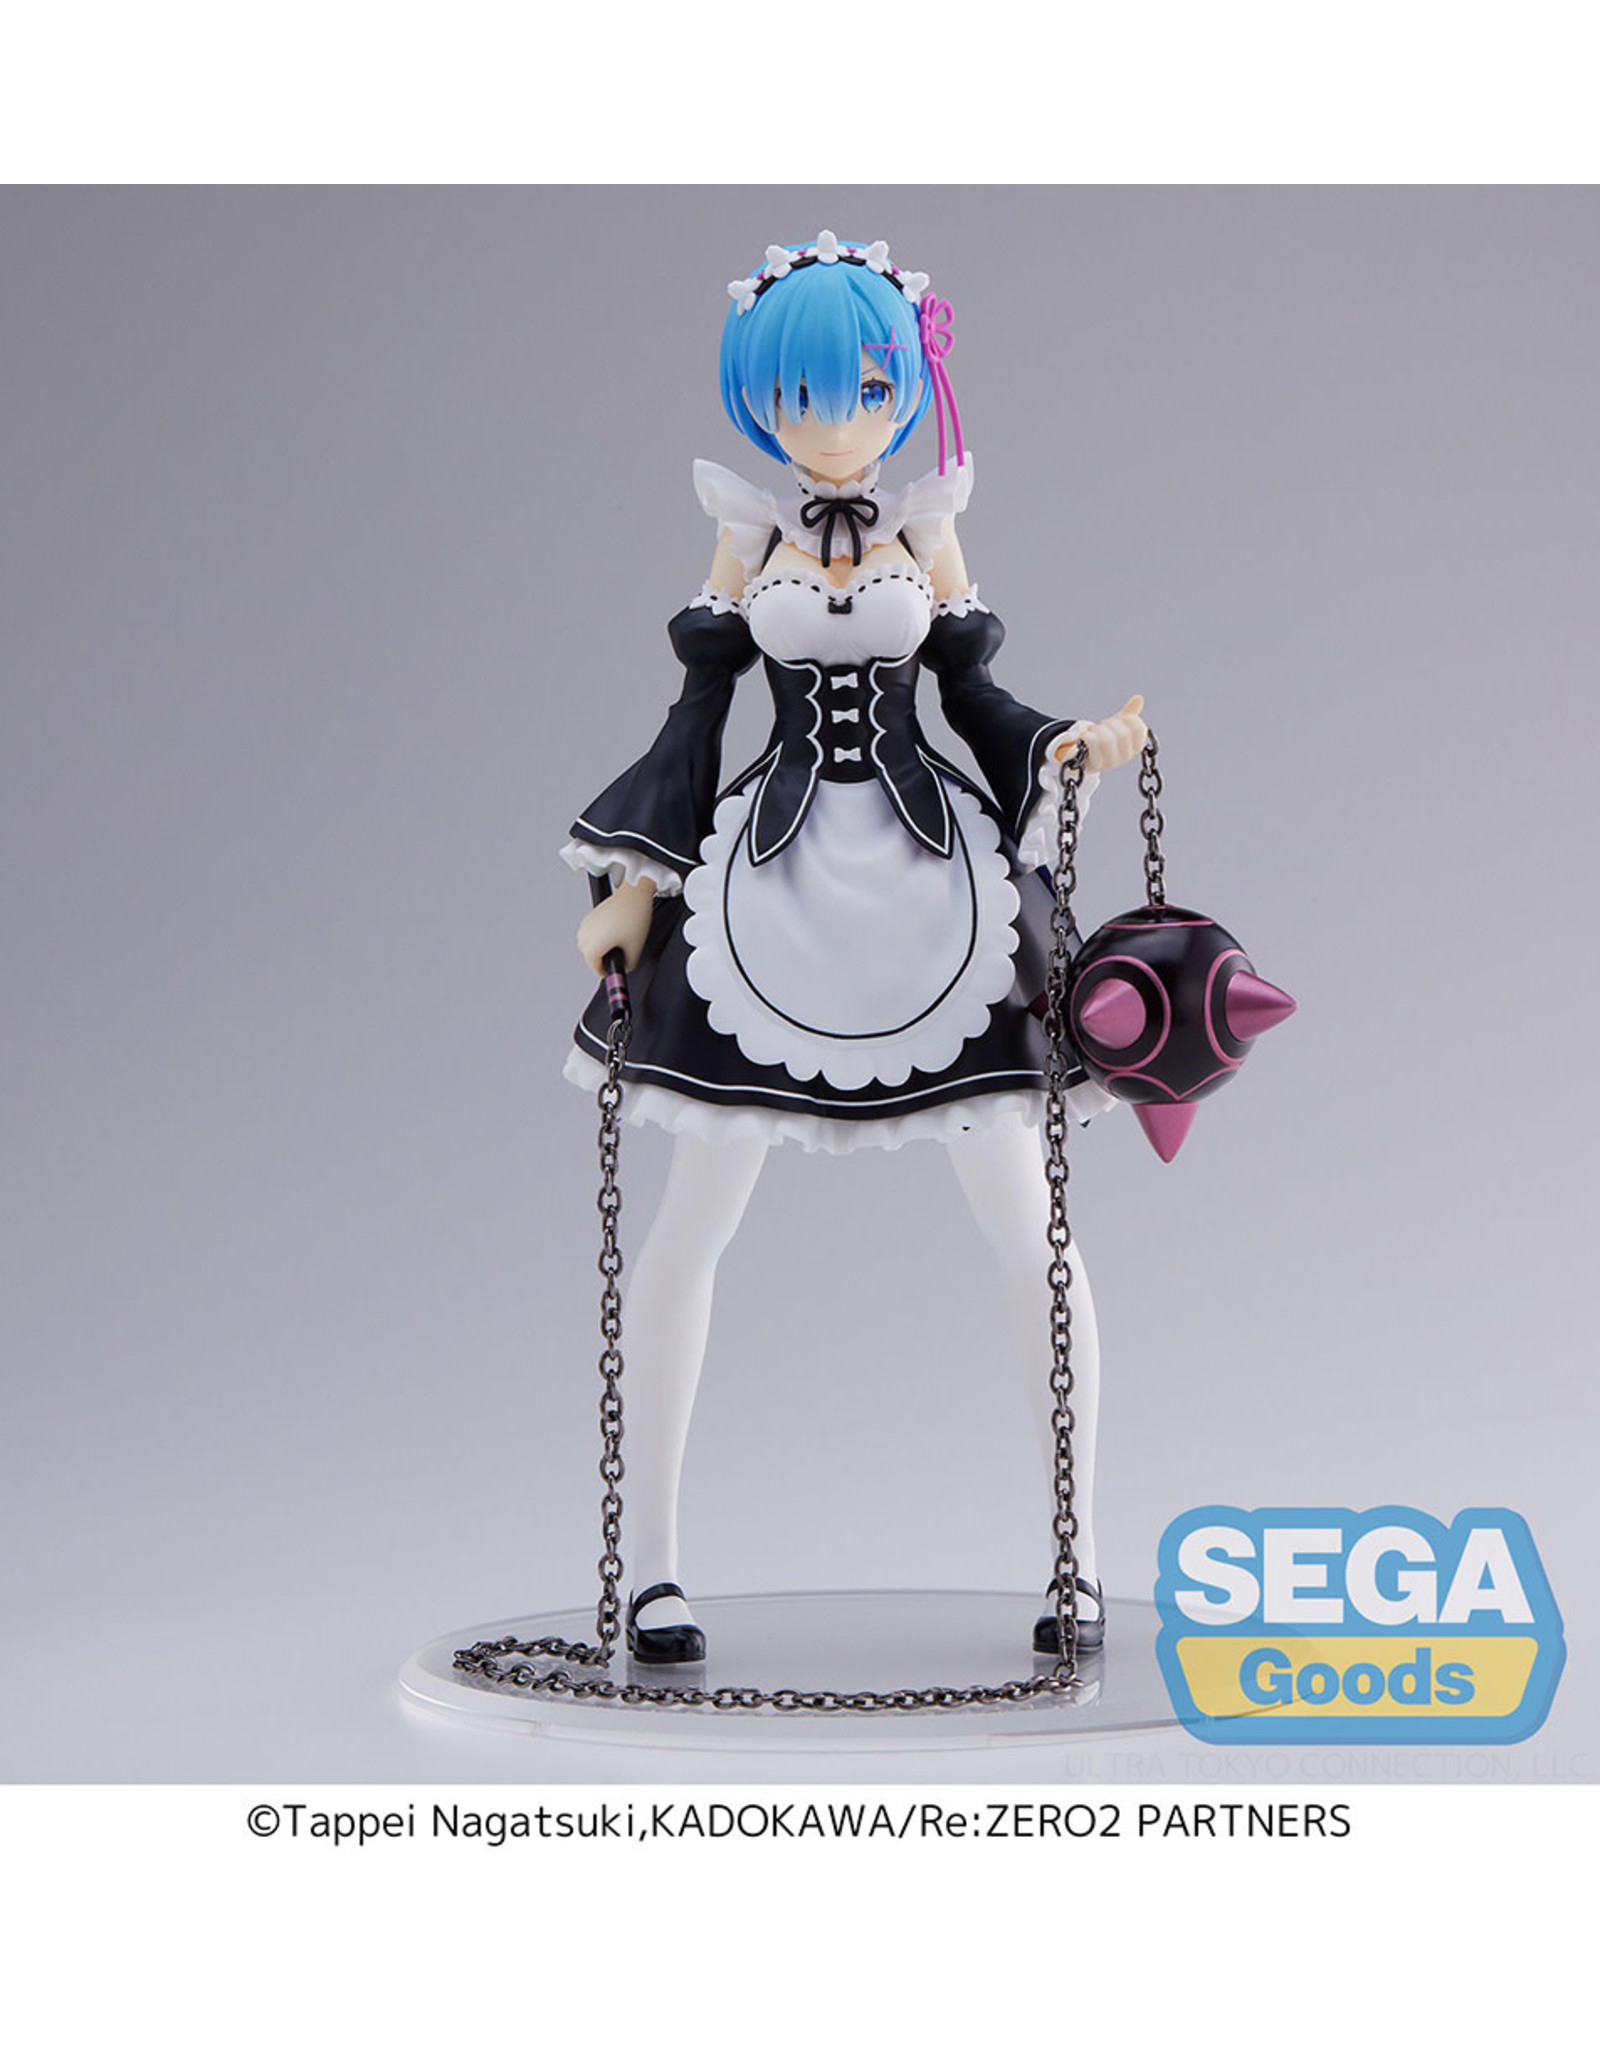 FIGURIZMa "Re:ZERO -Starting Life in Another World-" "Rem"